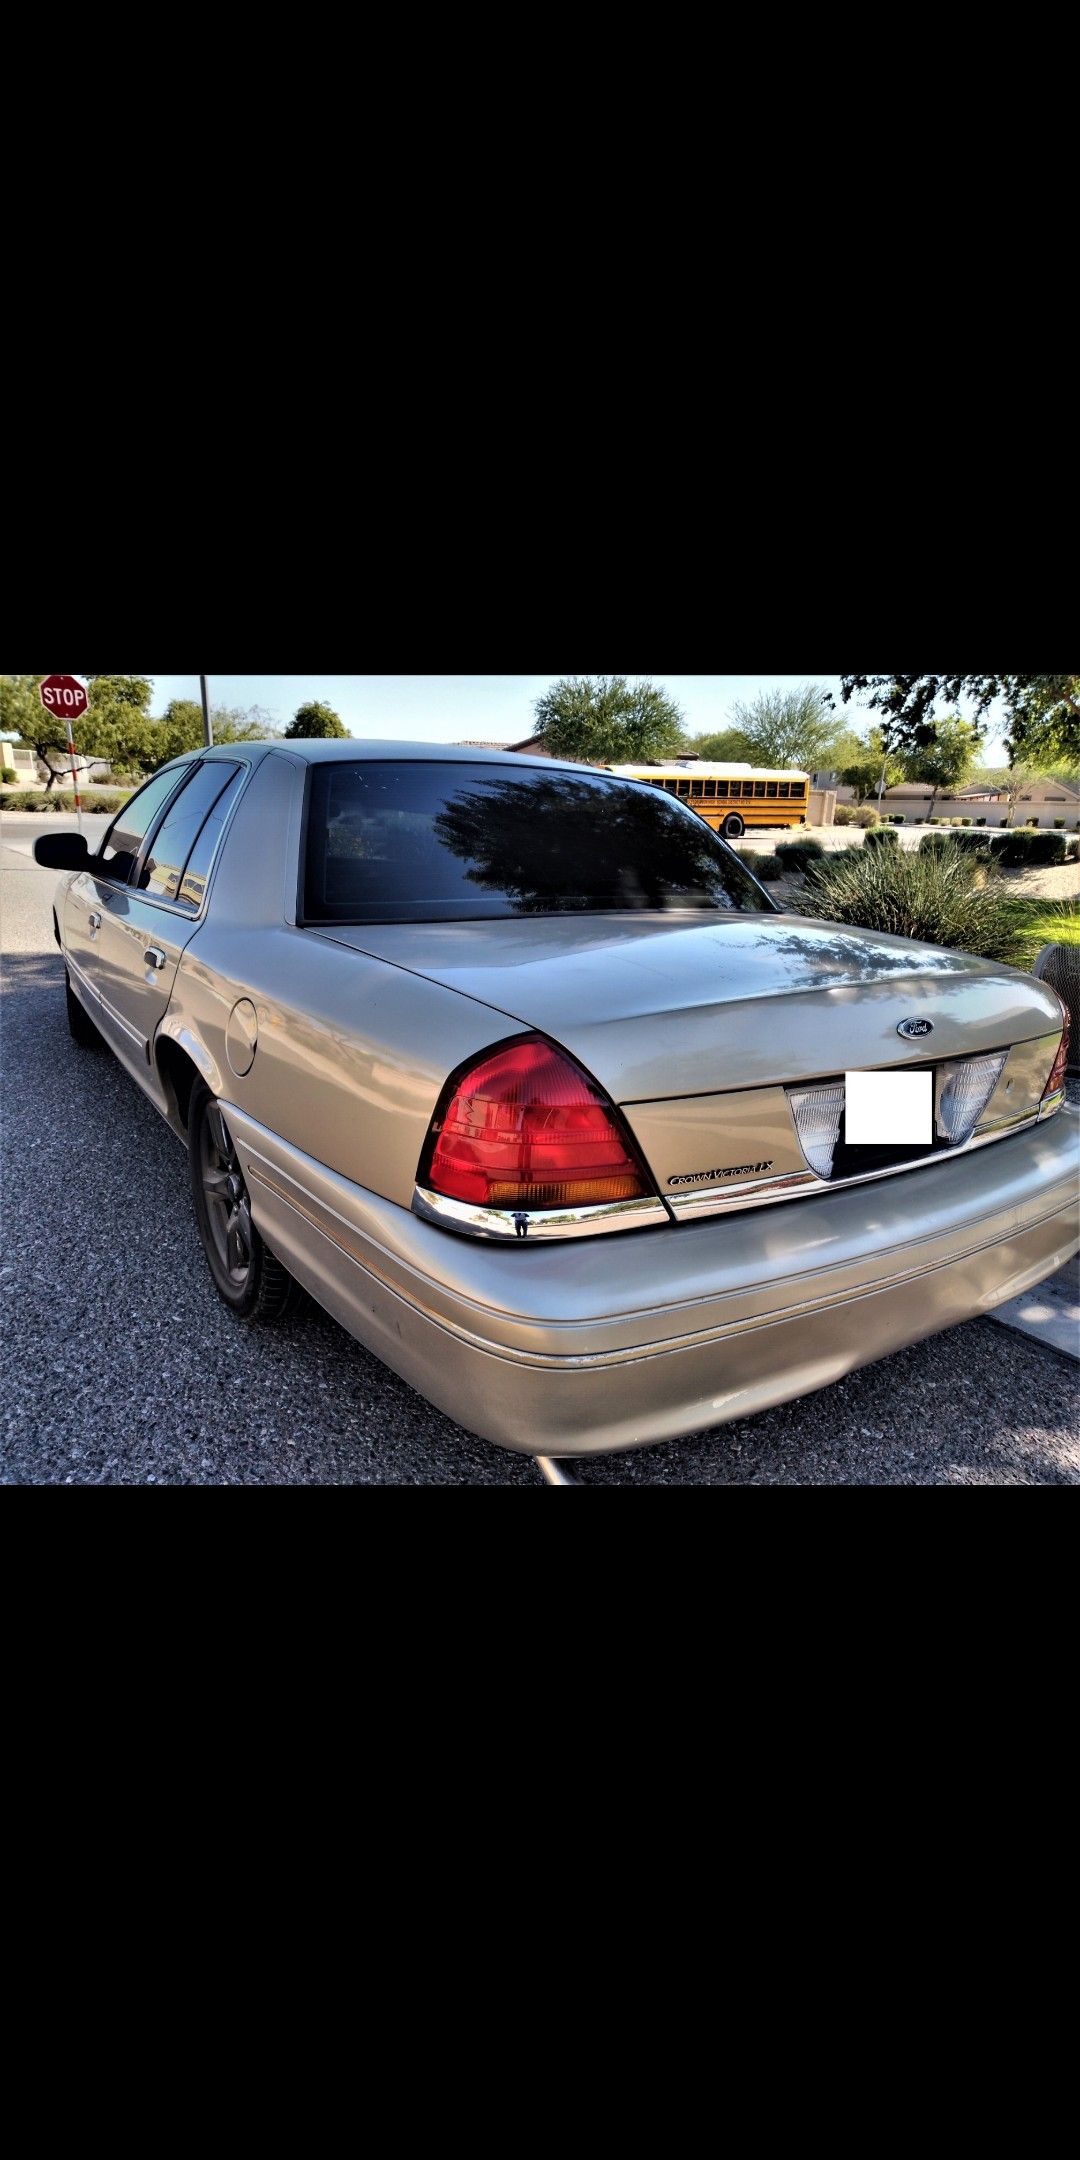 Reliable 2000 FORD crown victoria. 4.6L V8! Strong engine -  (Similar to town car grand Marquis LeSabre Impala)